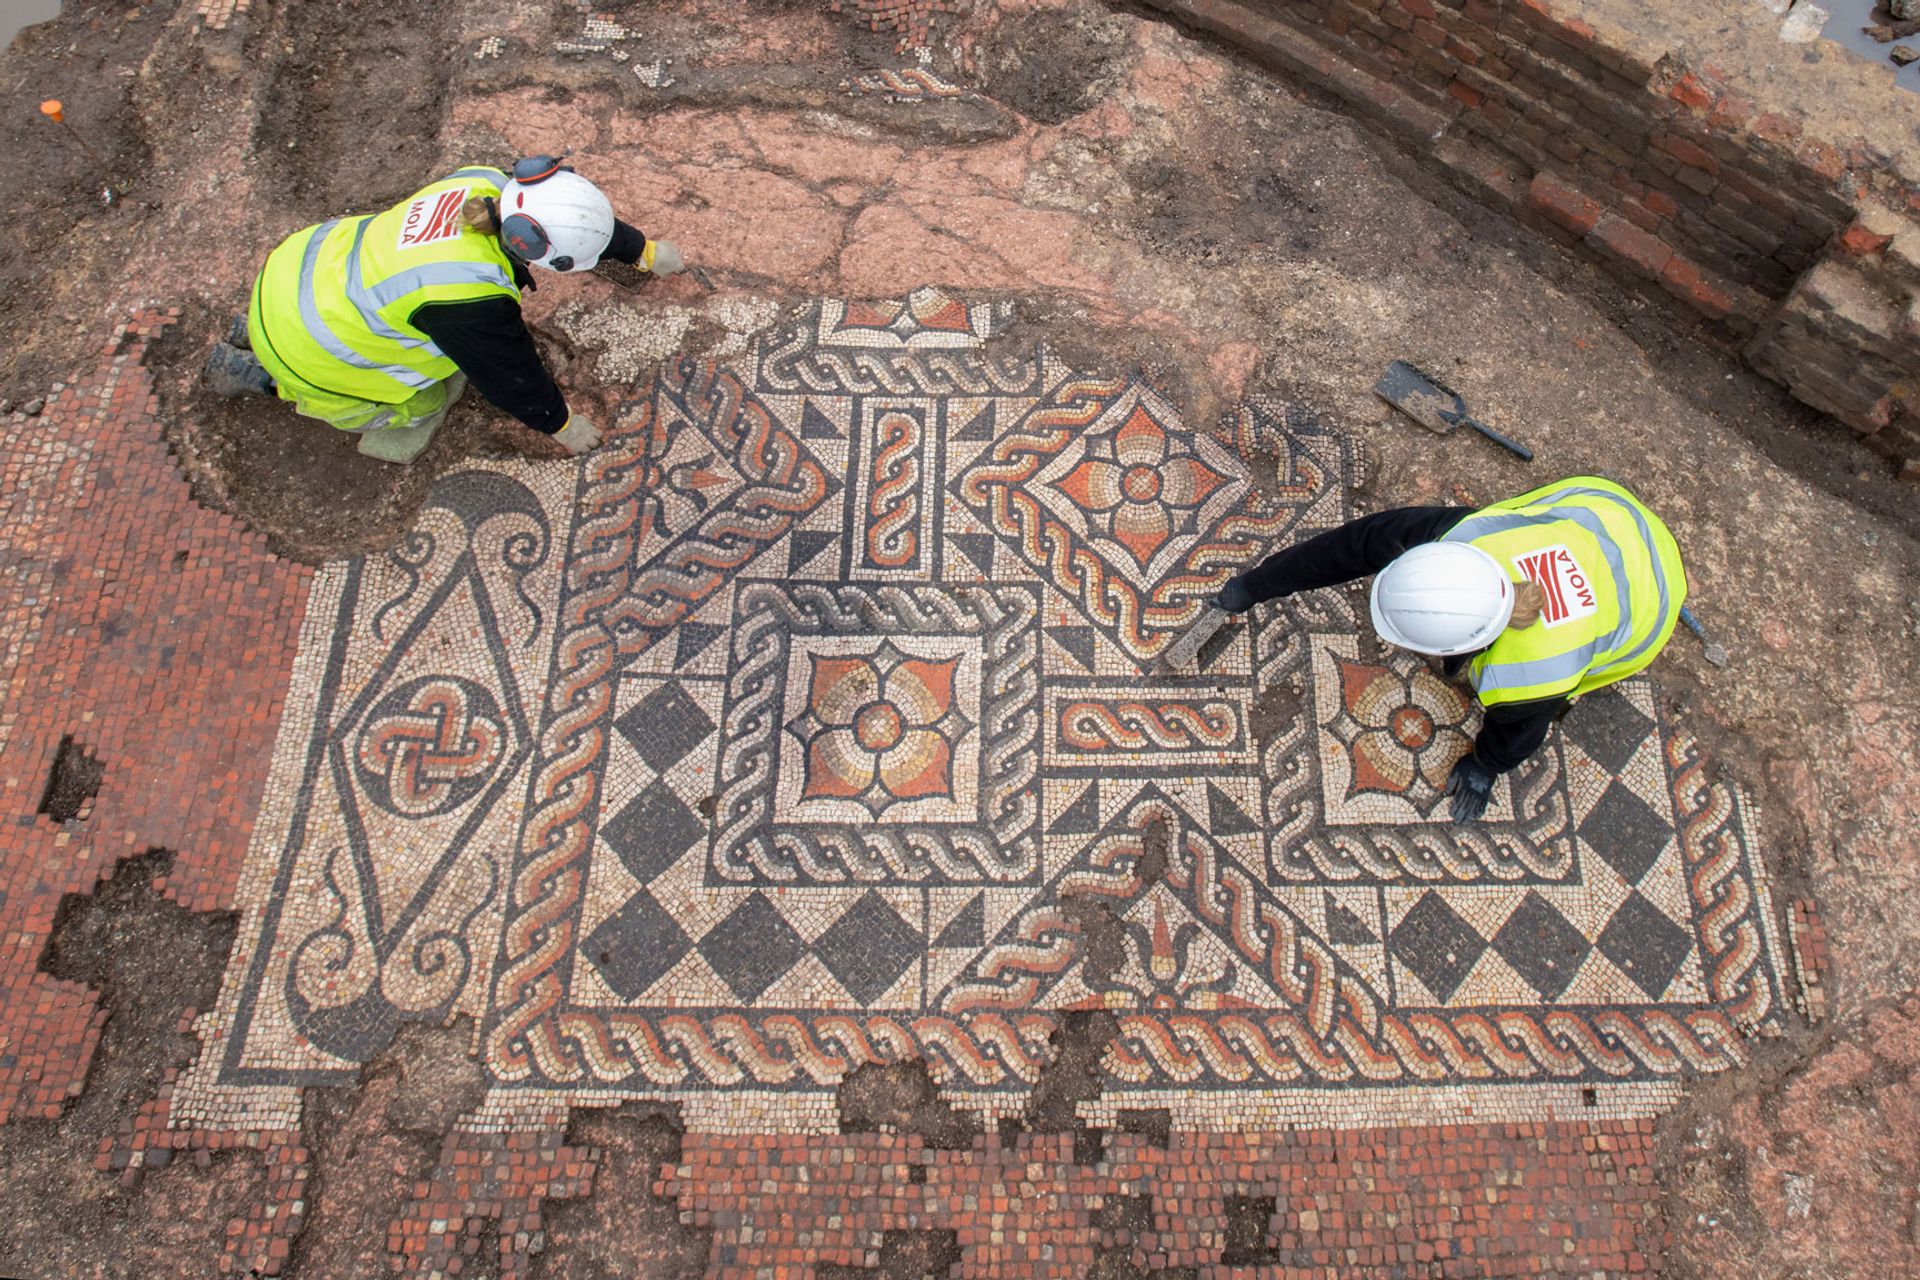 Archaeologists from the Museum of London Archaeology at work on the mosaic recently discovered in south London ©MOLA_Andy Chopping